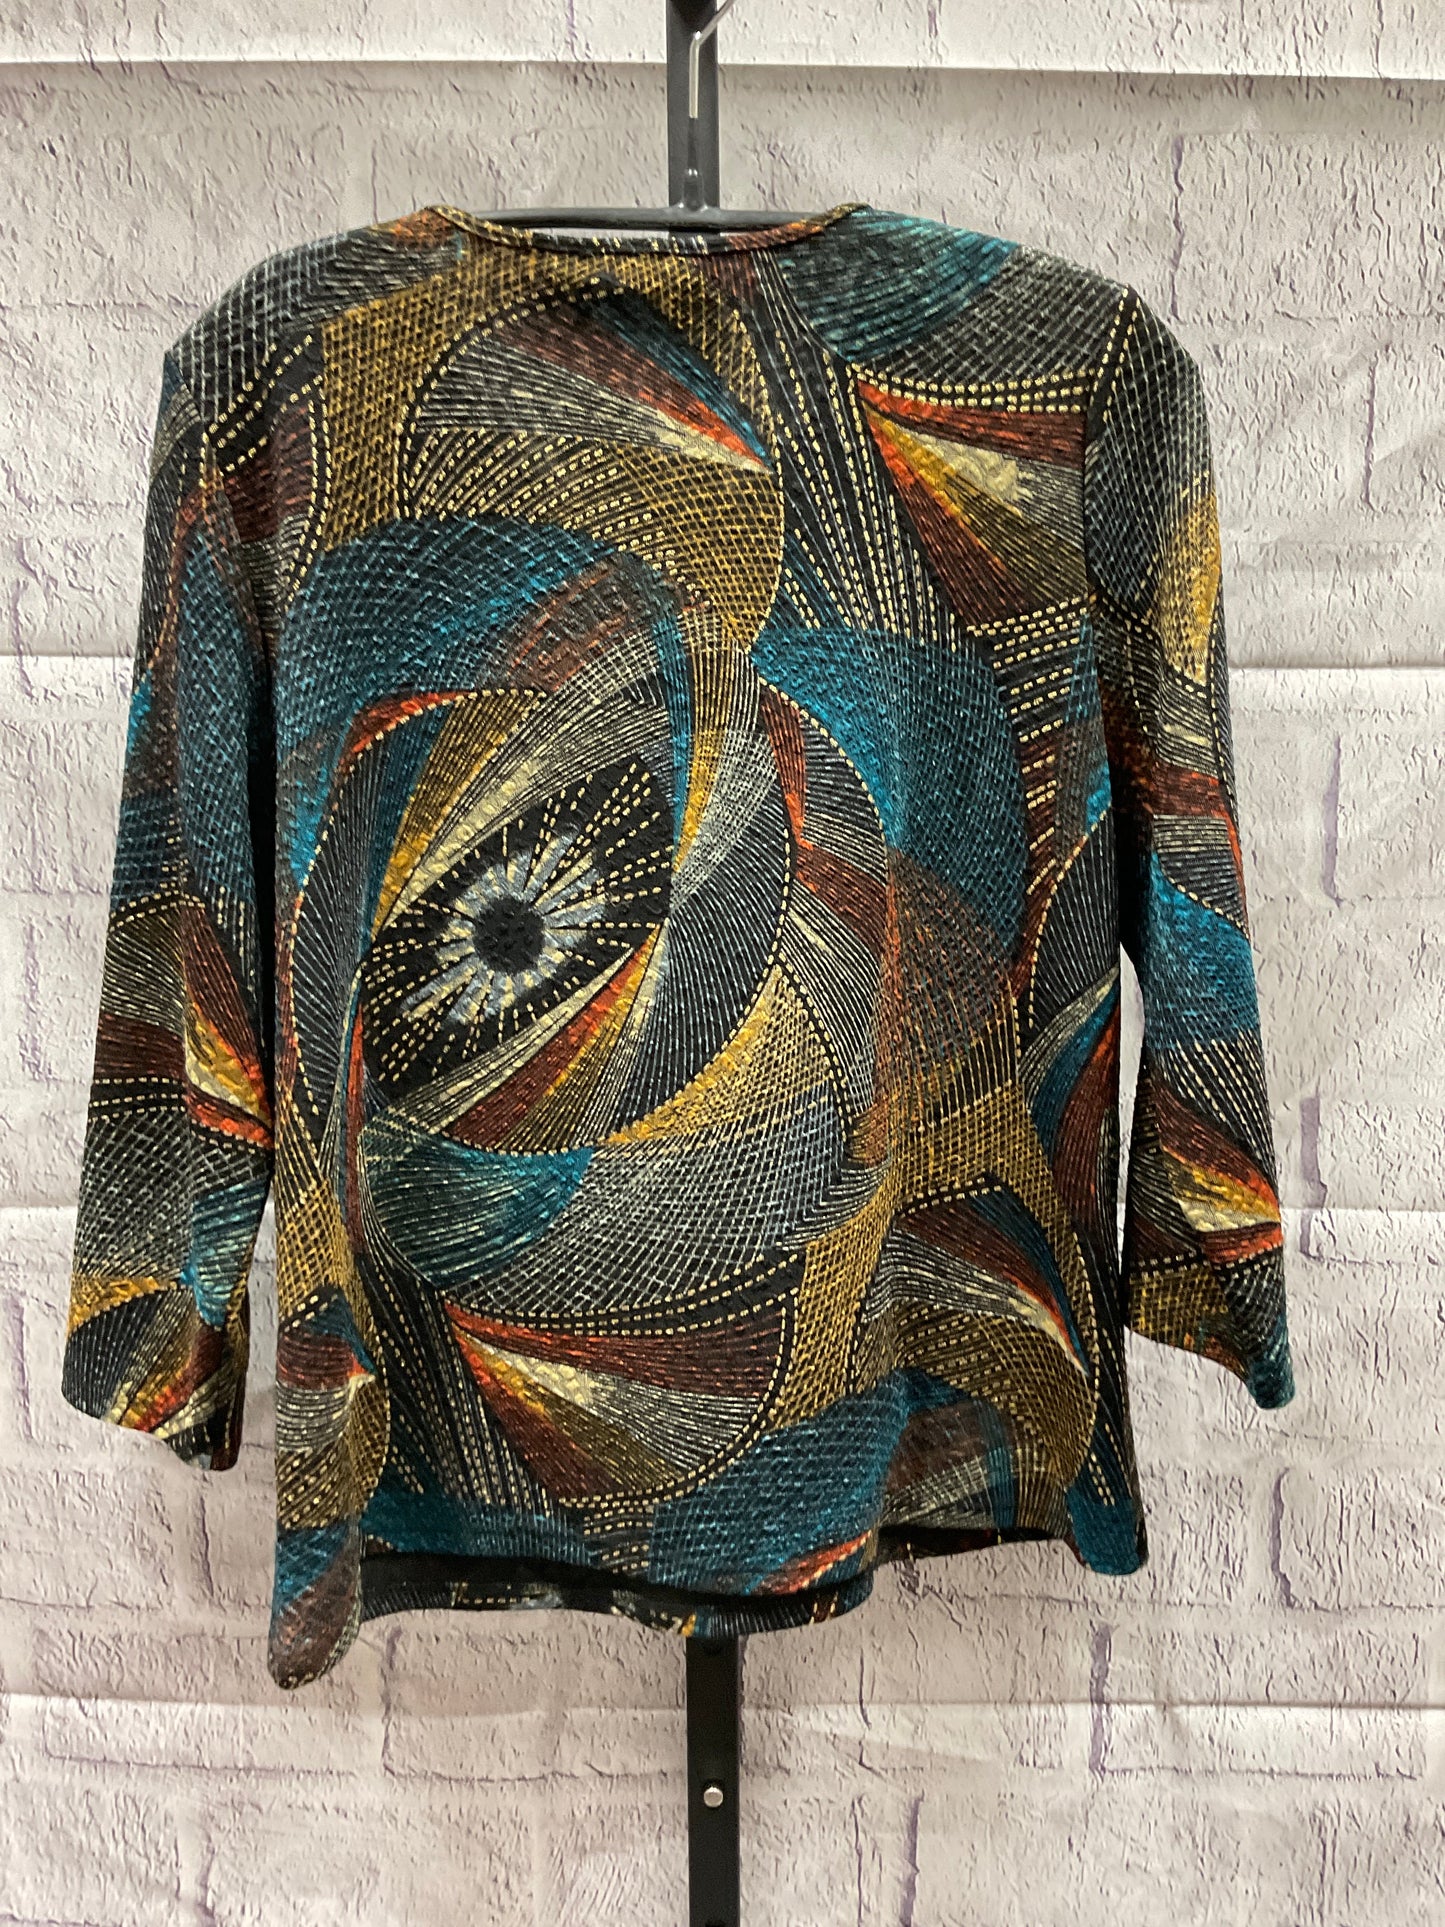 Top Long Sleeve By Allison Daley  Size: Petite  Medium